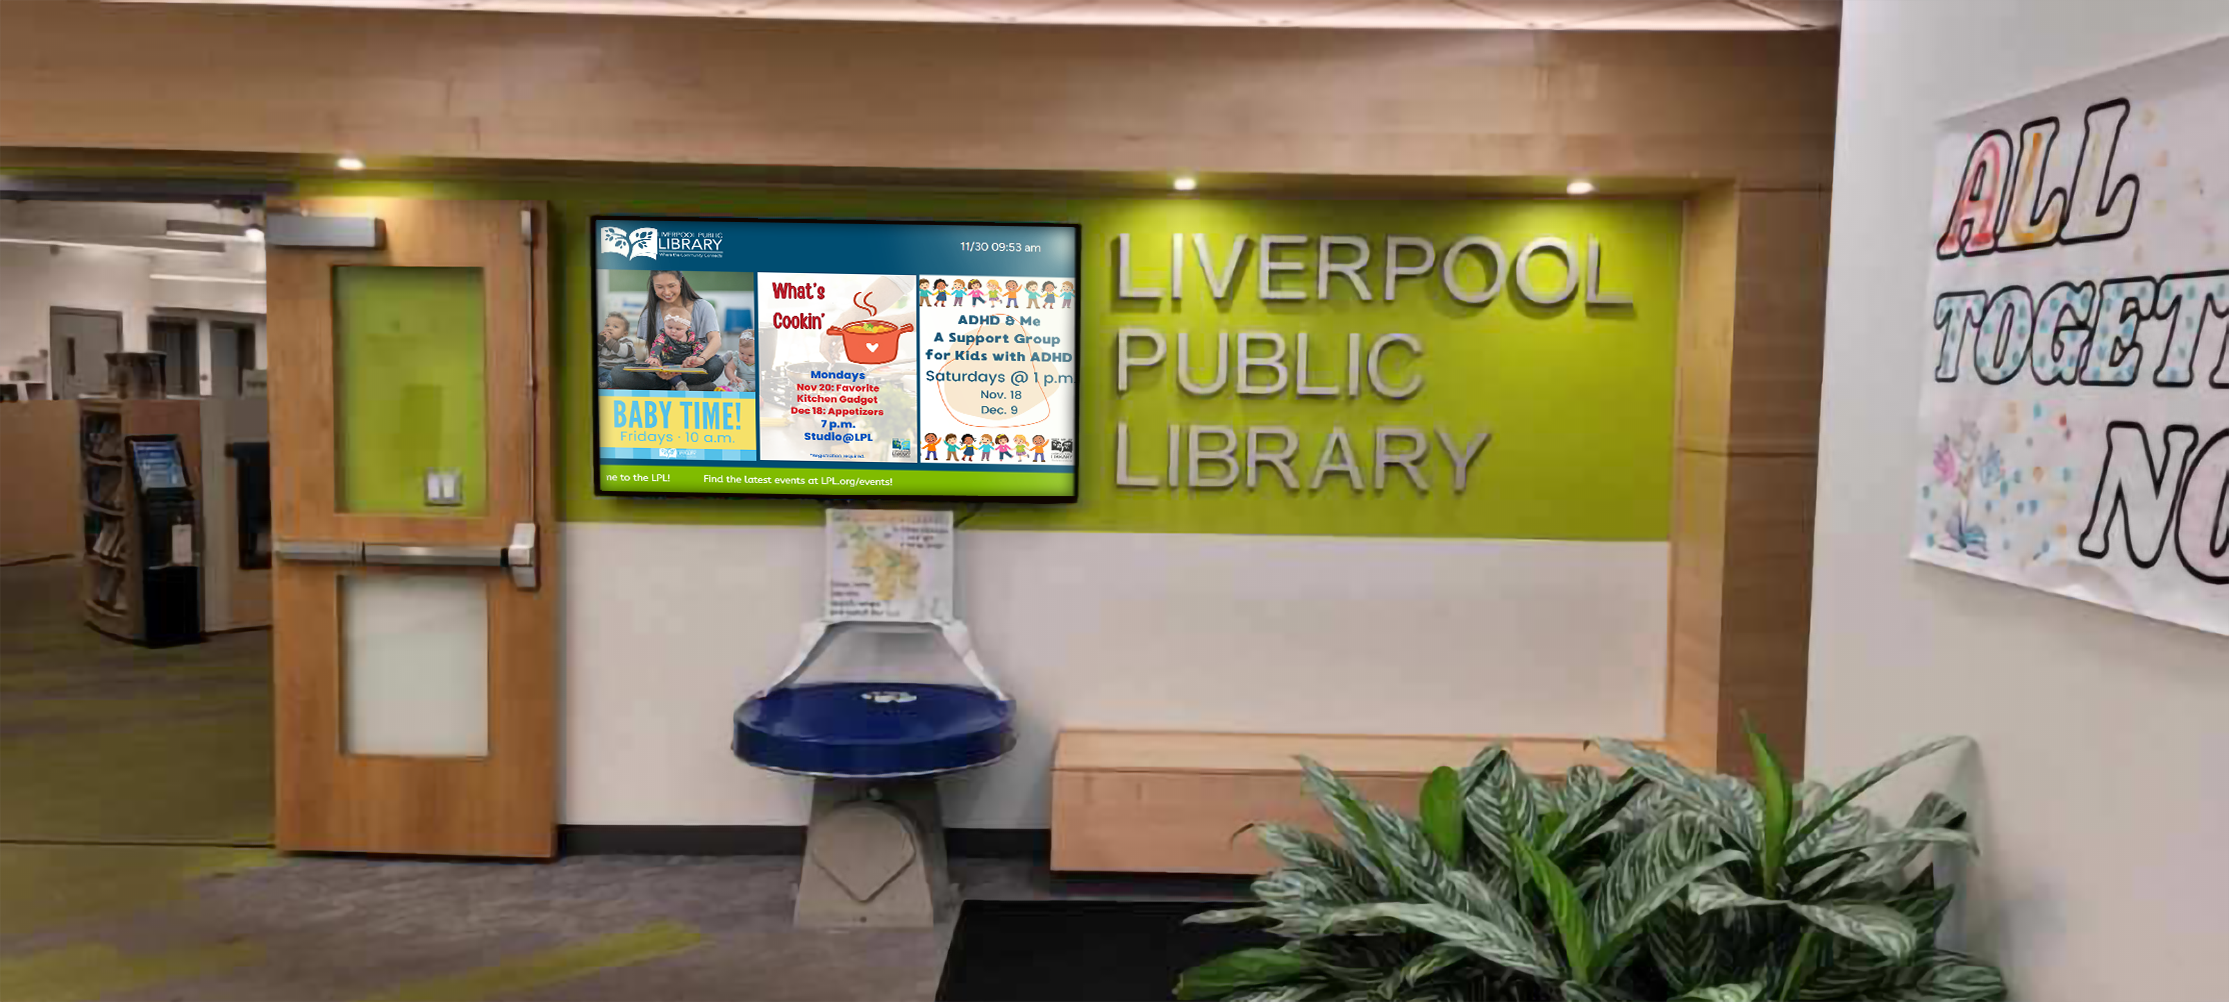 Liverpool Public Library, Library digital signage